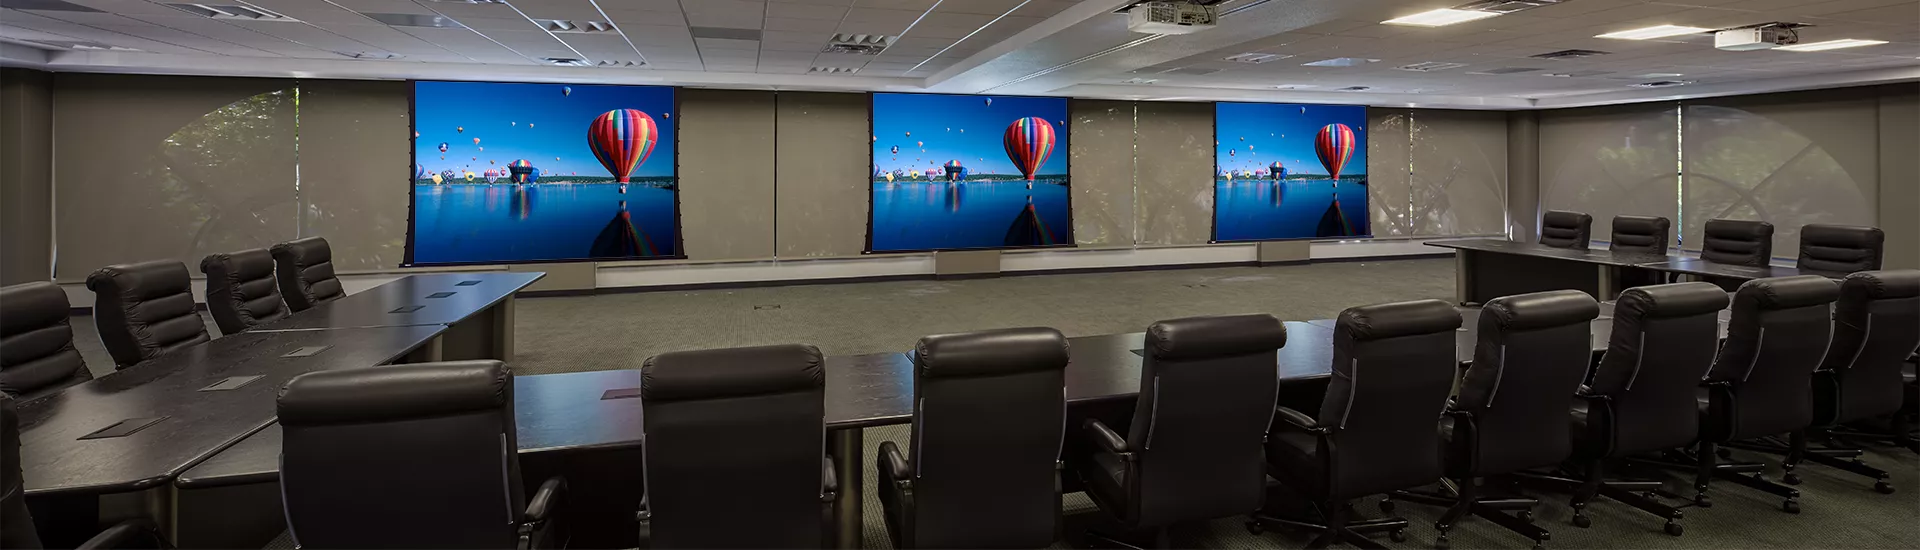 Access V screens with Matt White XT1000VB viewing surfaces and Manual FlexShade window shades at Valley First Credit Union, Modesto, CA. Photo by Kyle Jeffers.